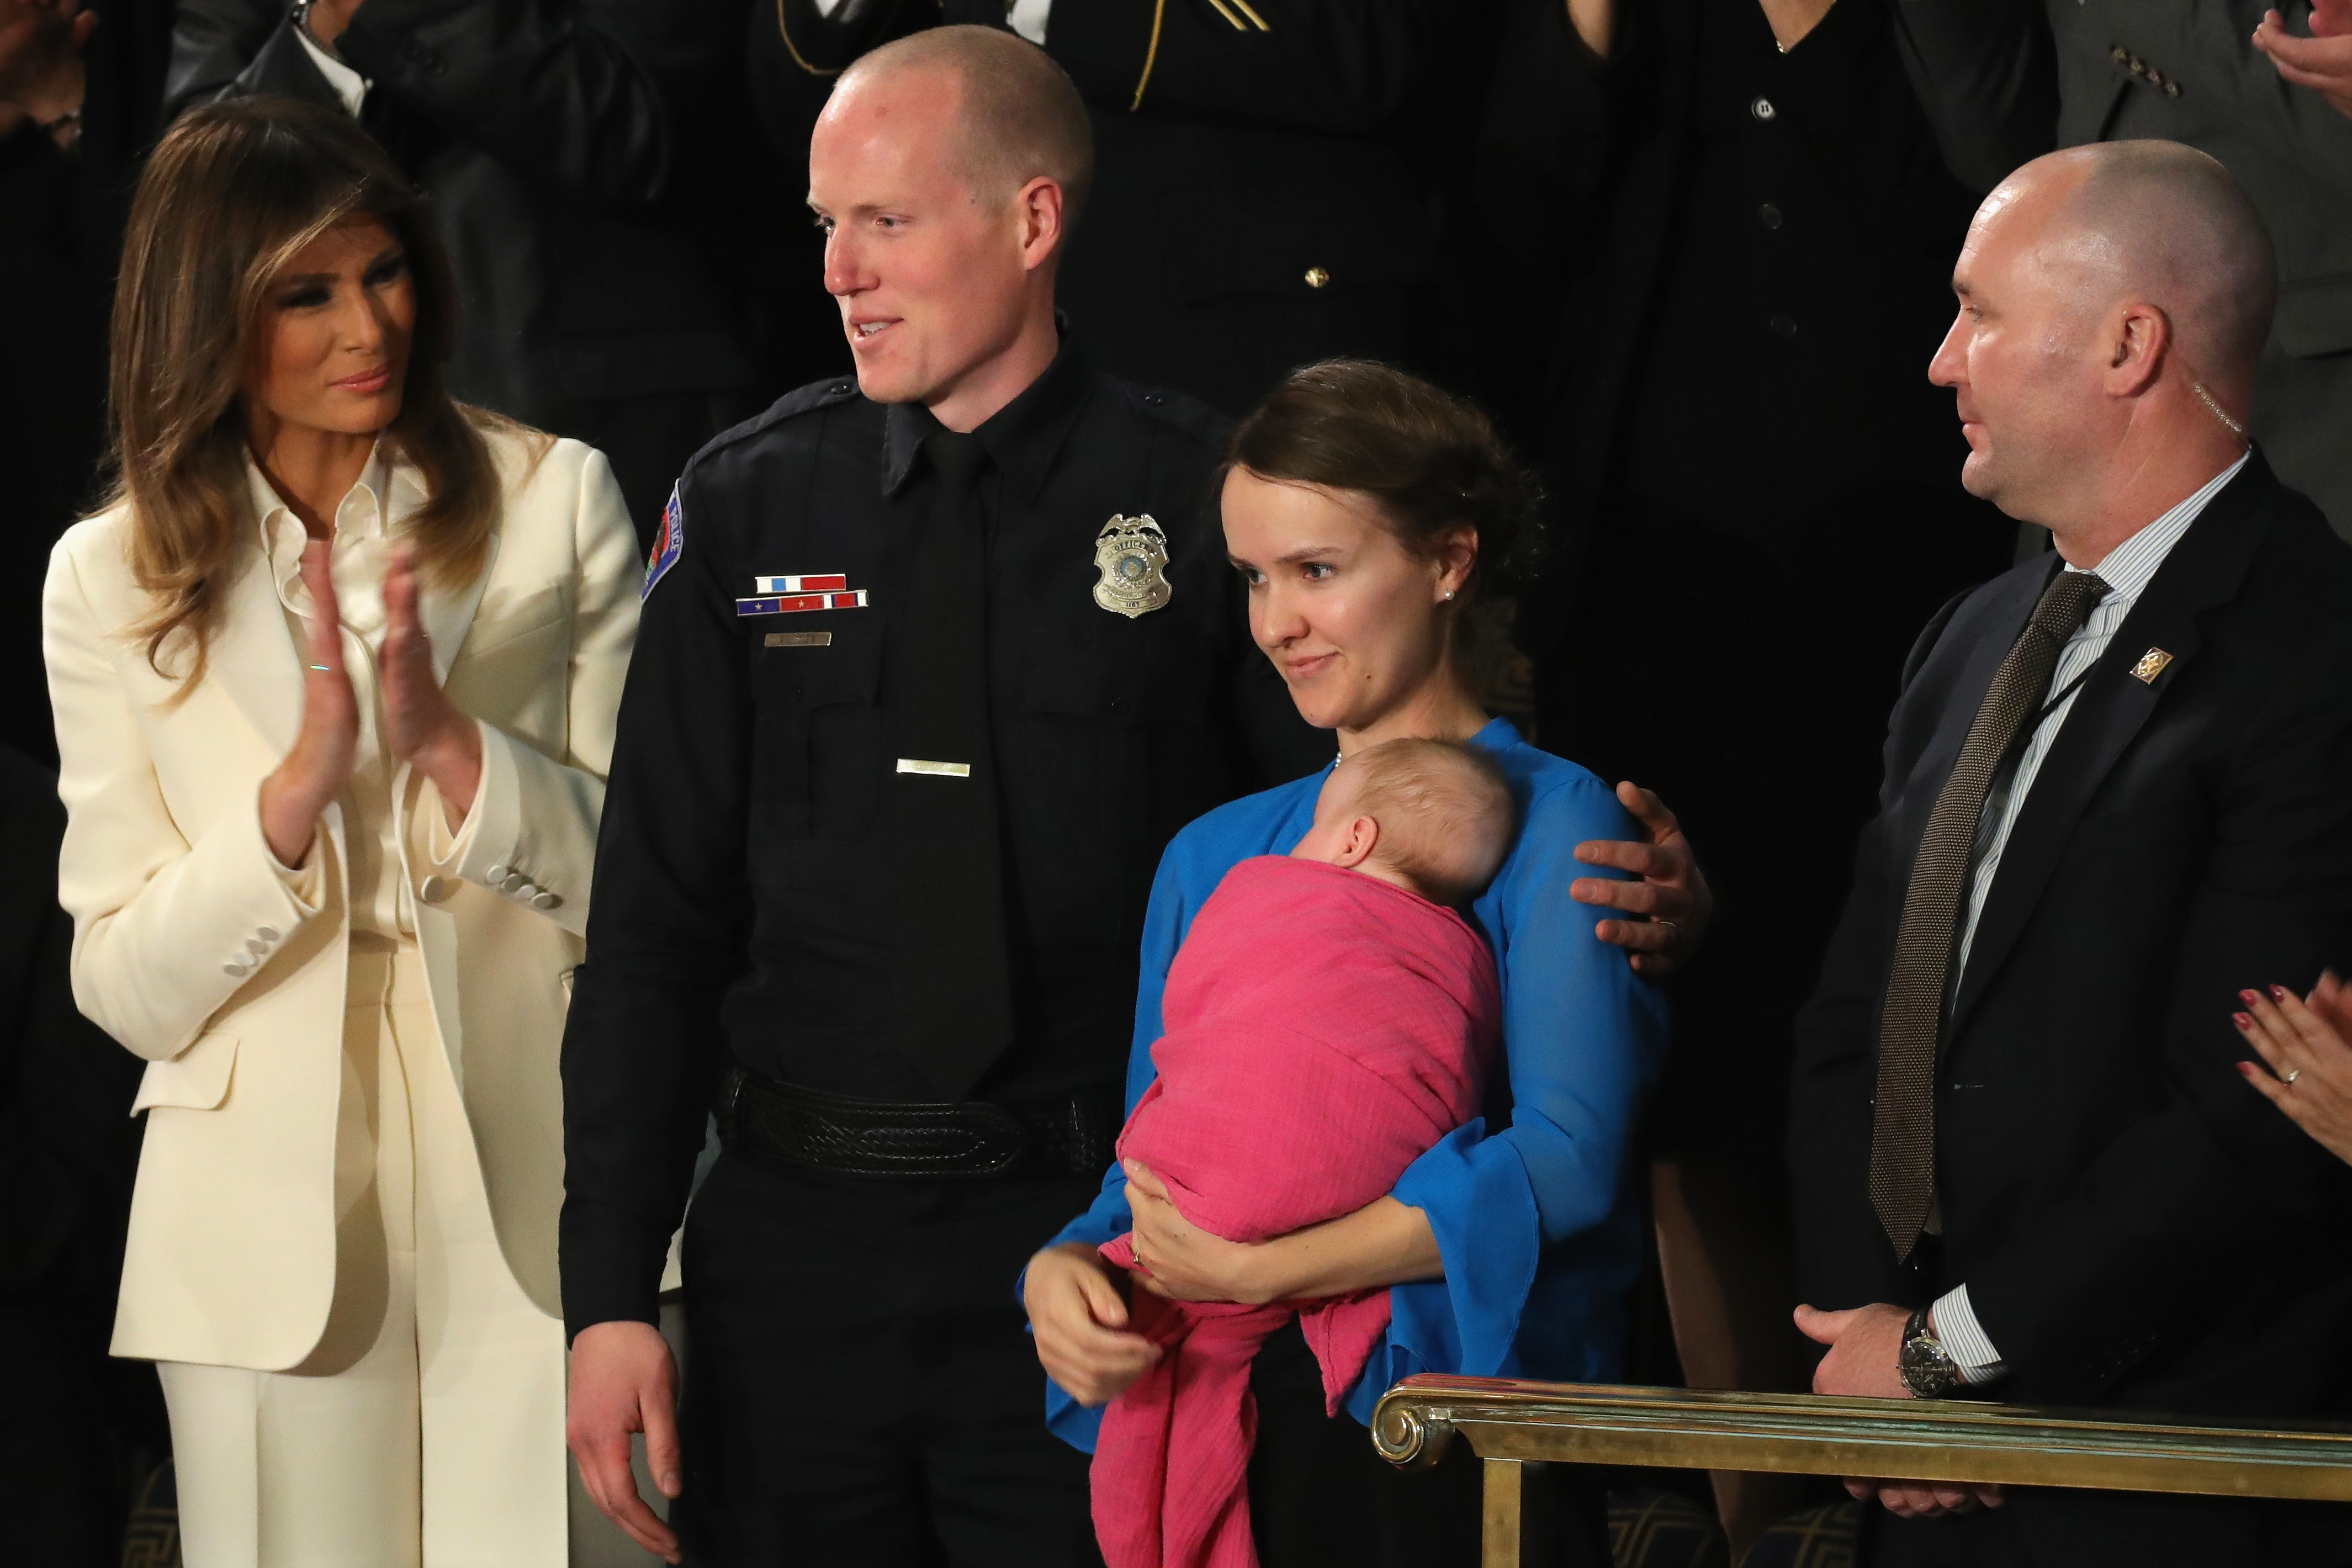 First lady Melania Trump claps for Police officer Ryan Holets and his wife during the State of the Union address in the chamber of the U.S. House of Representatives January 30, 2018 in Washington, DC. (Chip Somodevilla&mdash;Getty Images)